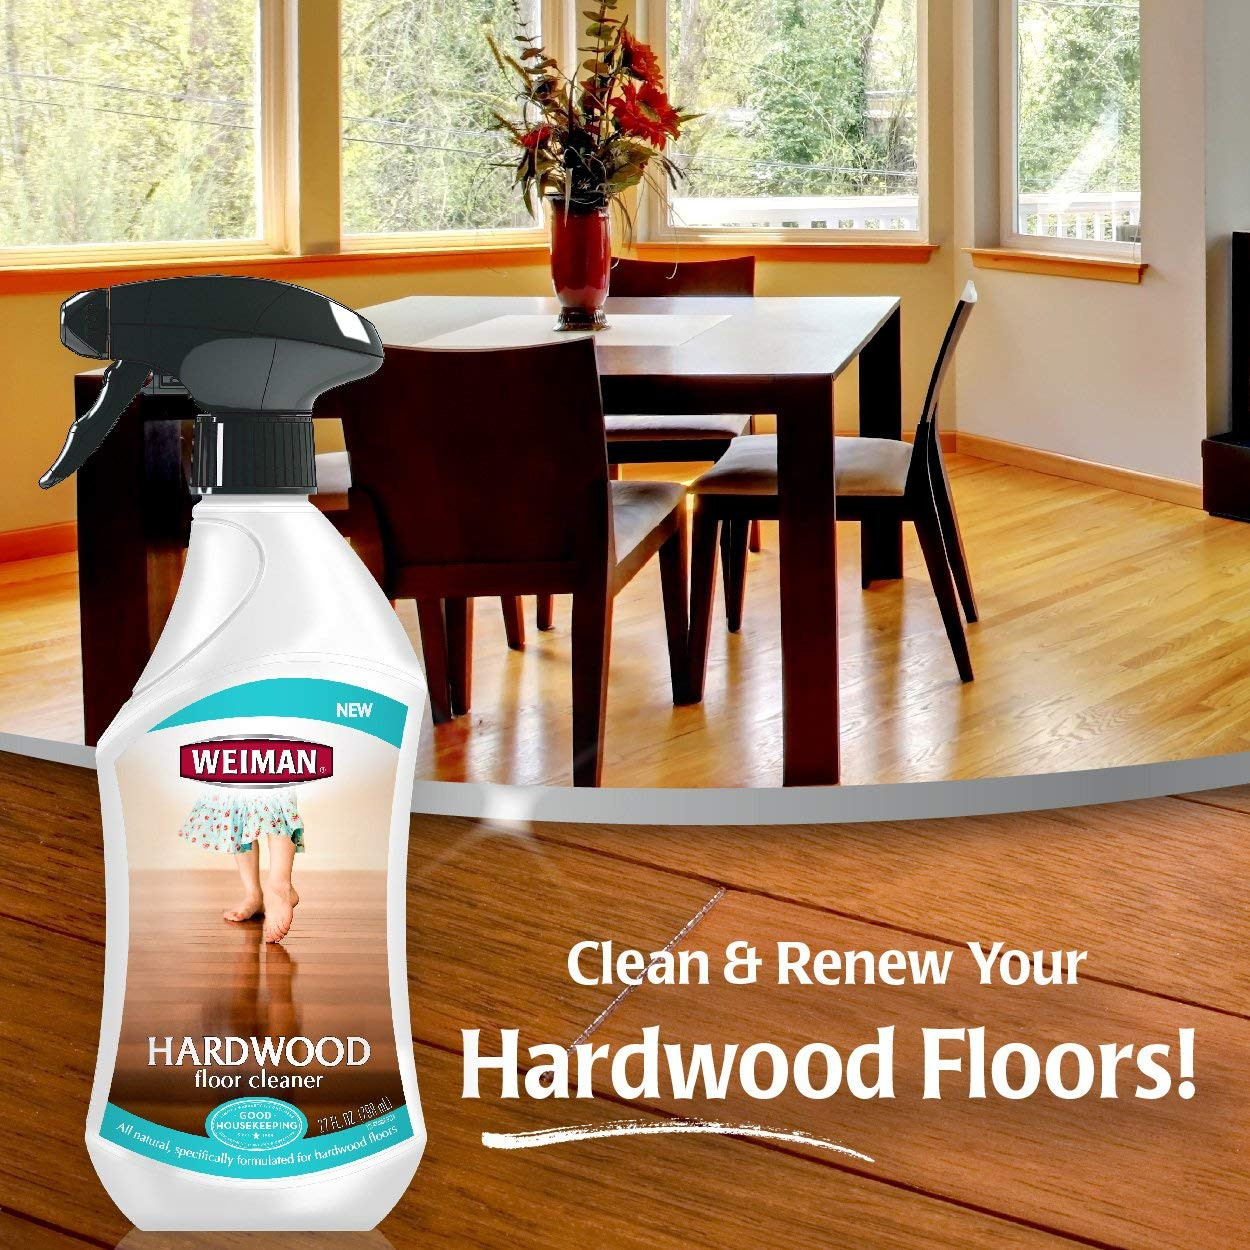 19 Awesome Hardwood Floor Finishing Supplies 2024 free download hardwood floor finishing supplies of amazon com weiman hardwood floor cleaner surface safe no harsh within amazon com weiman hardwood floor cleaner surface safe no harsh scent safe for use a